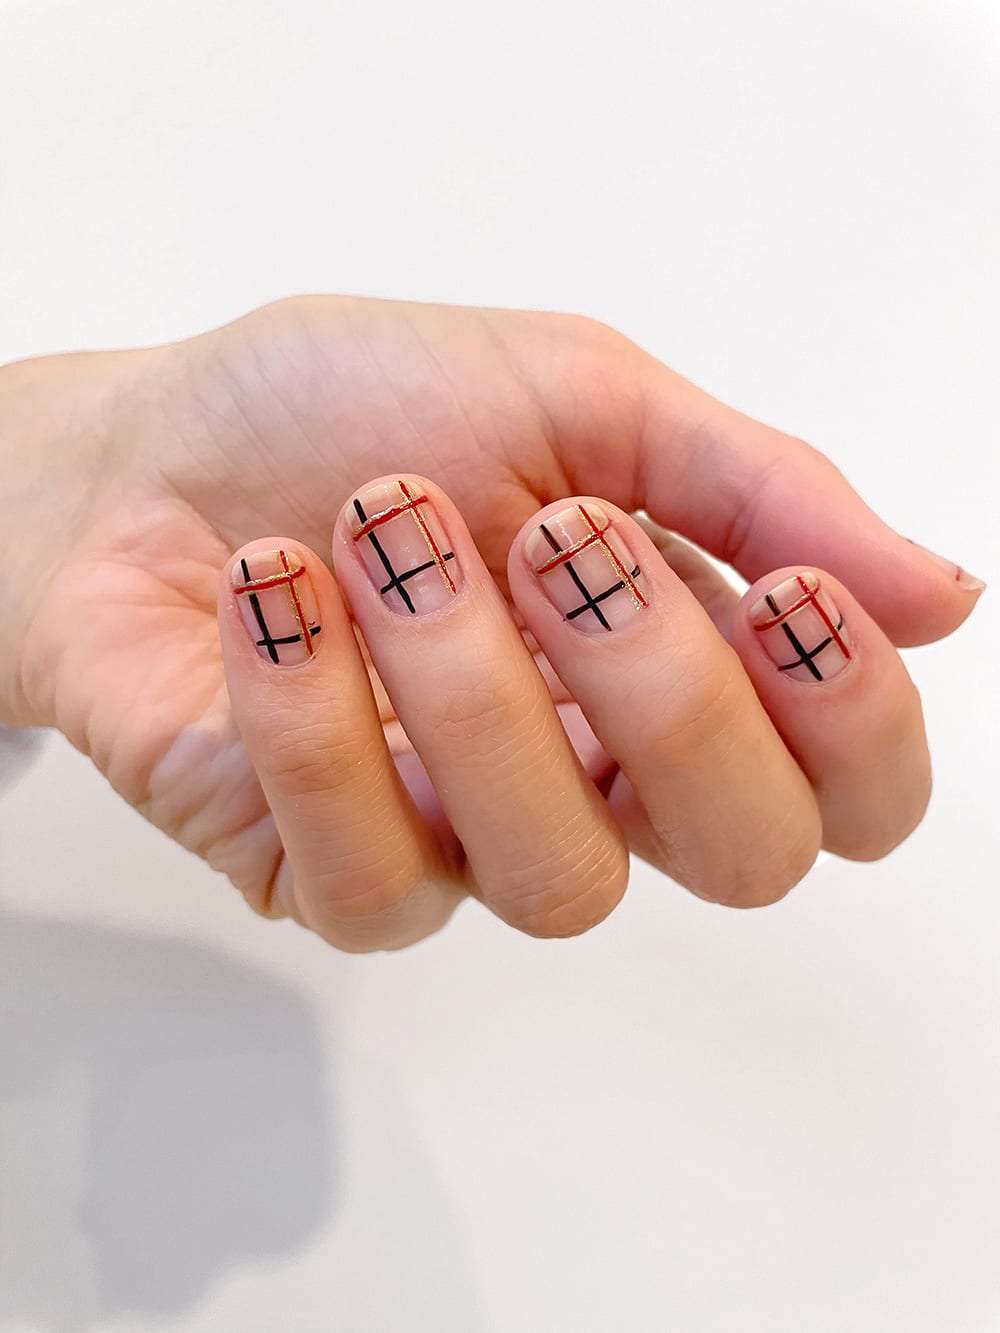 step 8 of plaid nails tutorial with red, gold and black lines